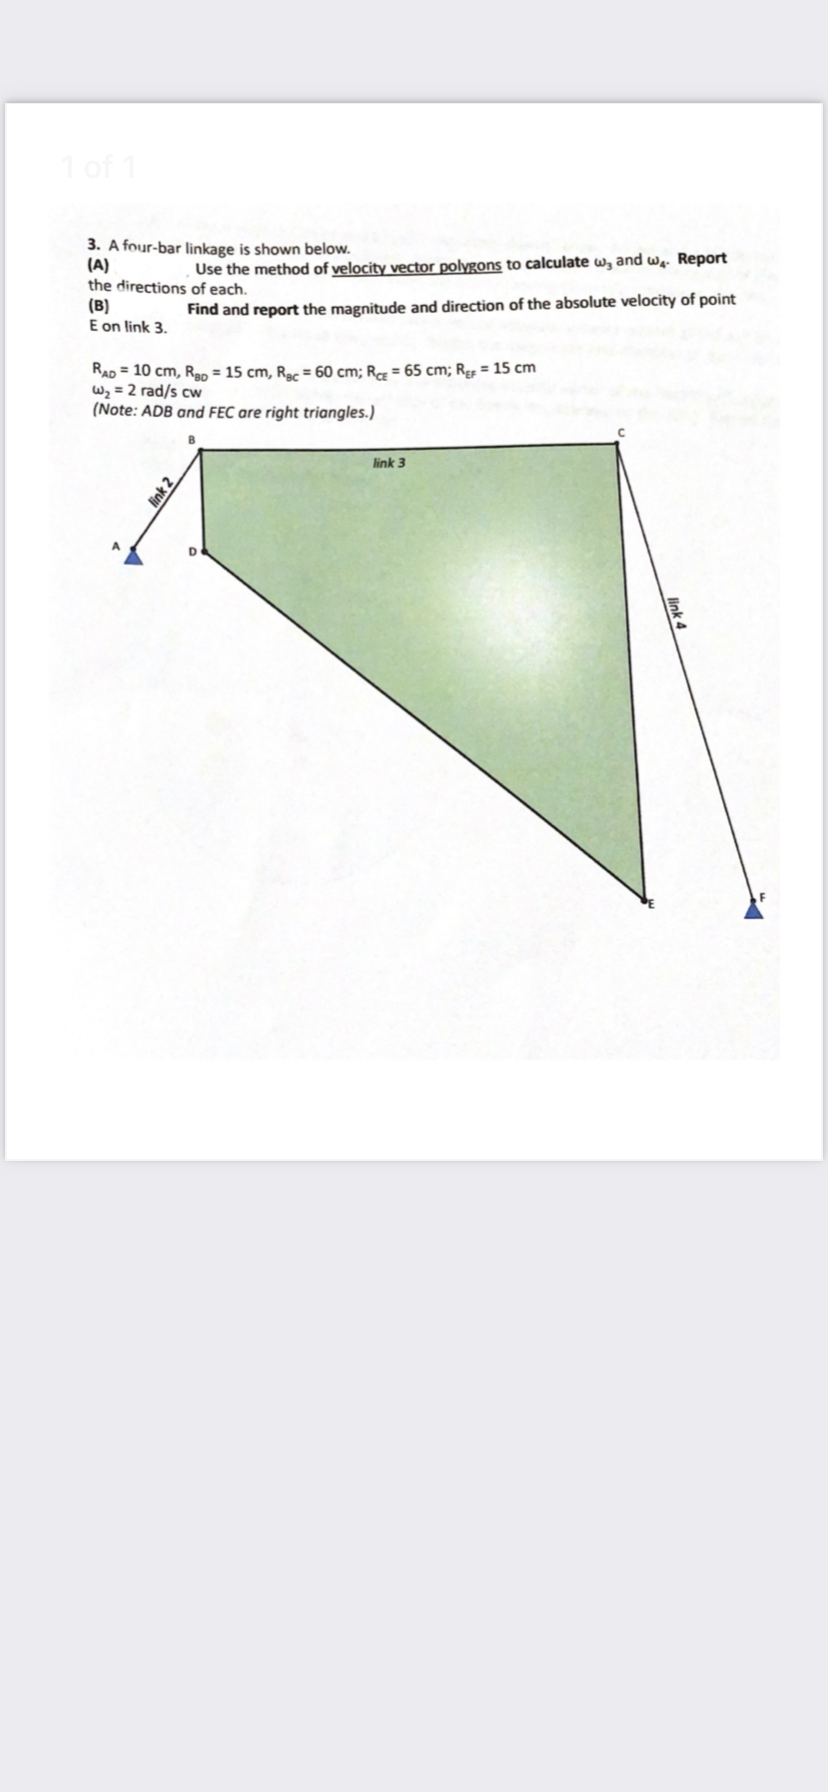 1 of 1
3. A four-bar linkage is shown below.
(A)
the directions of each.
(B)
E on link 3.
Use the method of velocity vector polygons to calculate w, and wq. Report
Find and report the magnitude and direction of the absolute velocity of point
RAD = 10 cm, Rap = 15 cm, Ra = 60 cm; R = 65 cm; Rp = 15 cm
W2 = 2 rad/s cw
(Note: ADB and FEC are right triangles.)
link 3
A.
link 2
